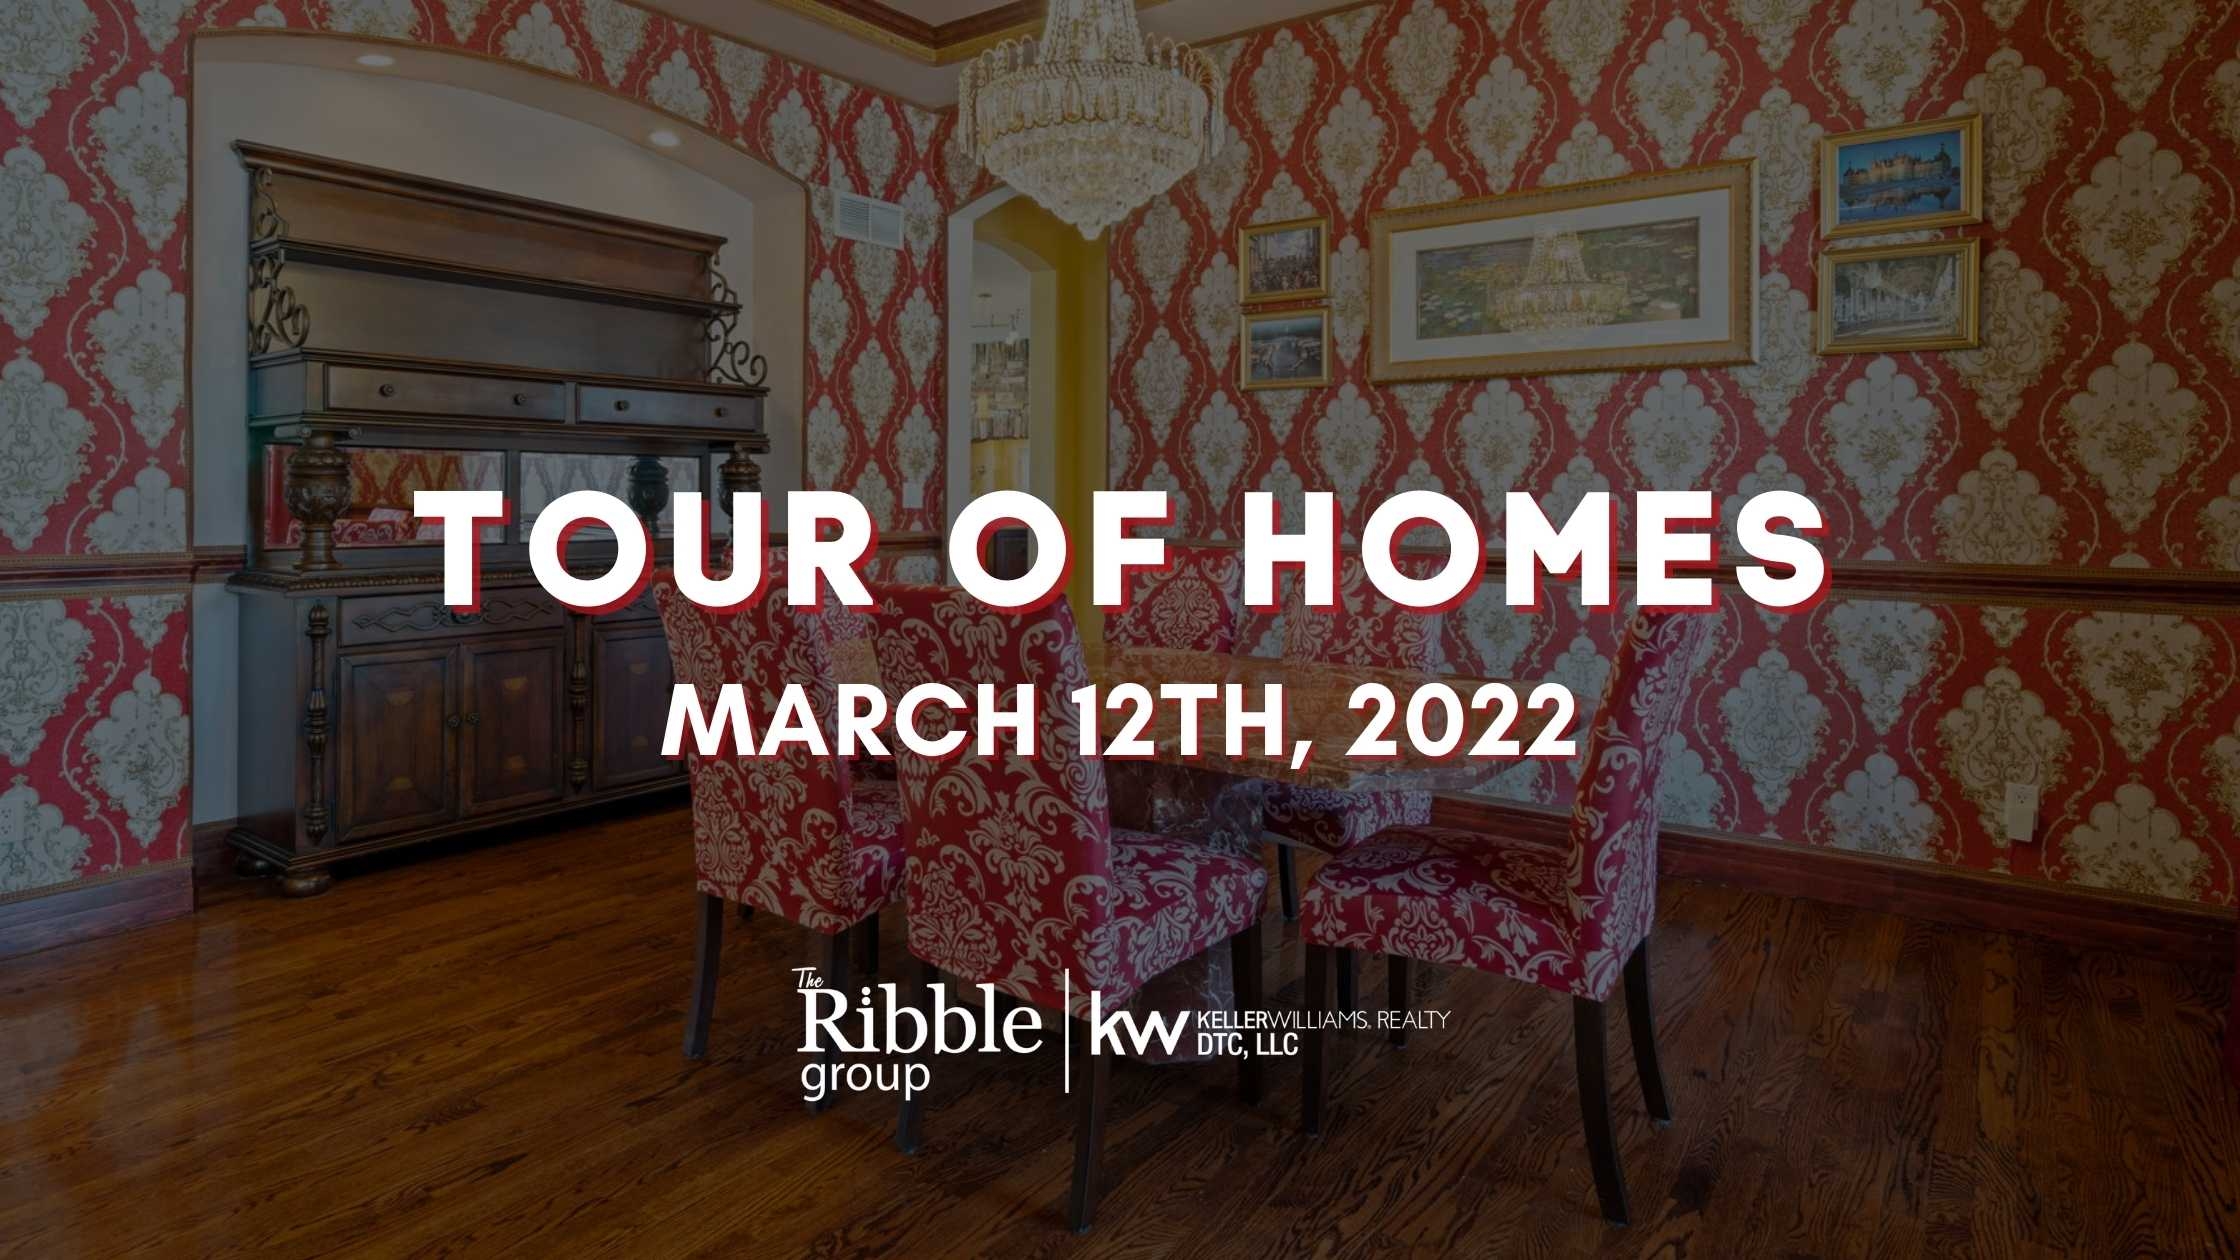 Colorado Tour of Homes March 12th